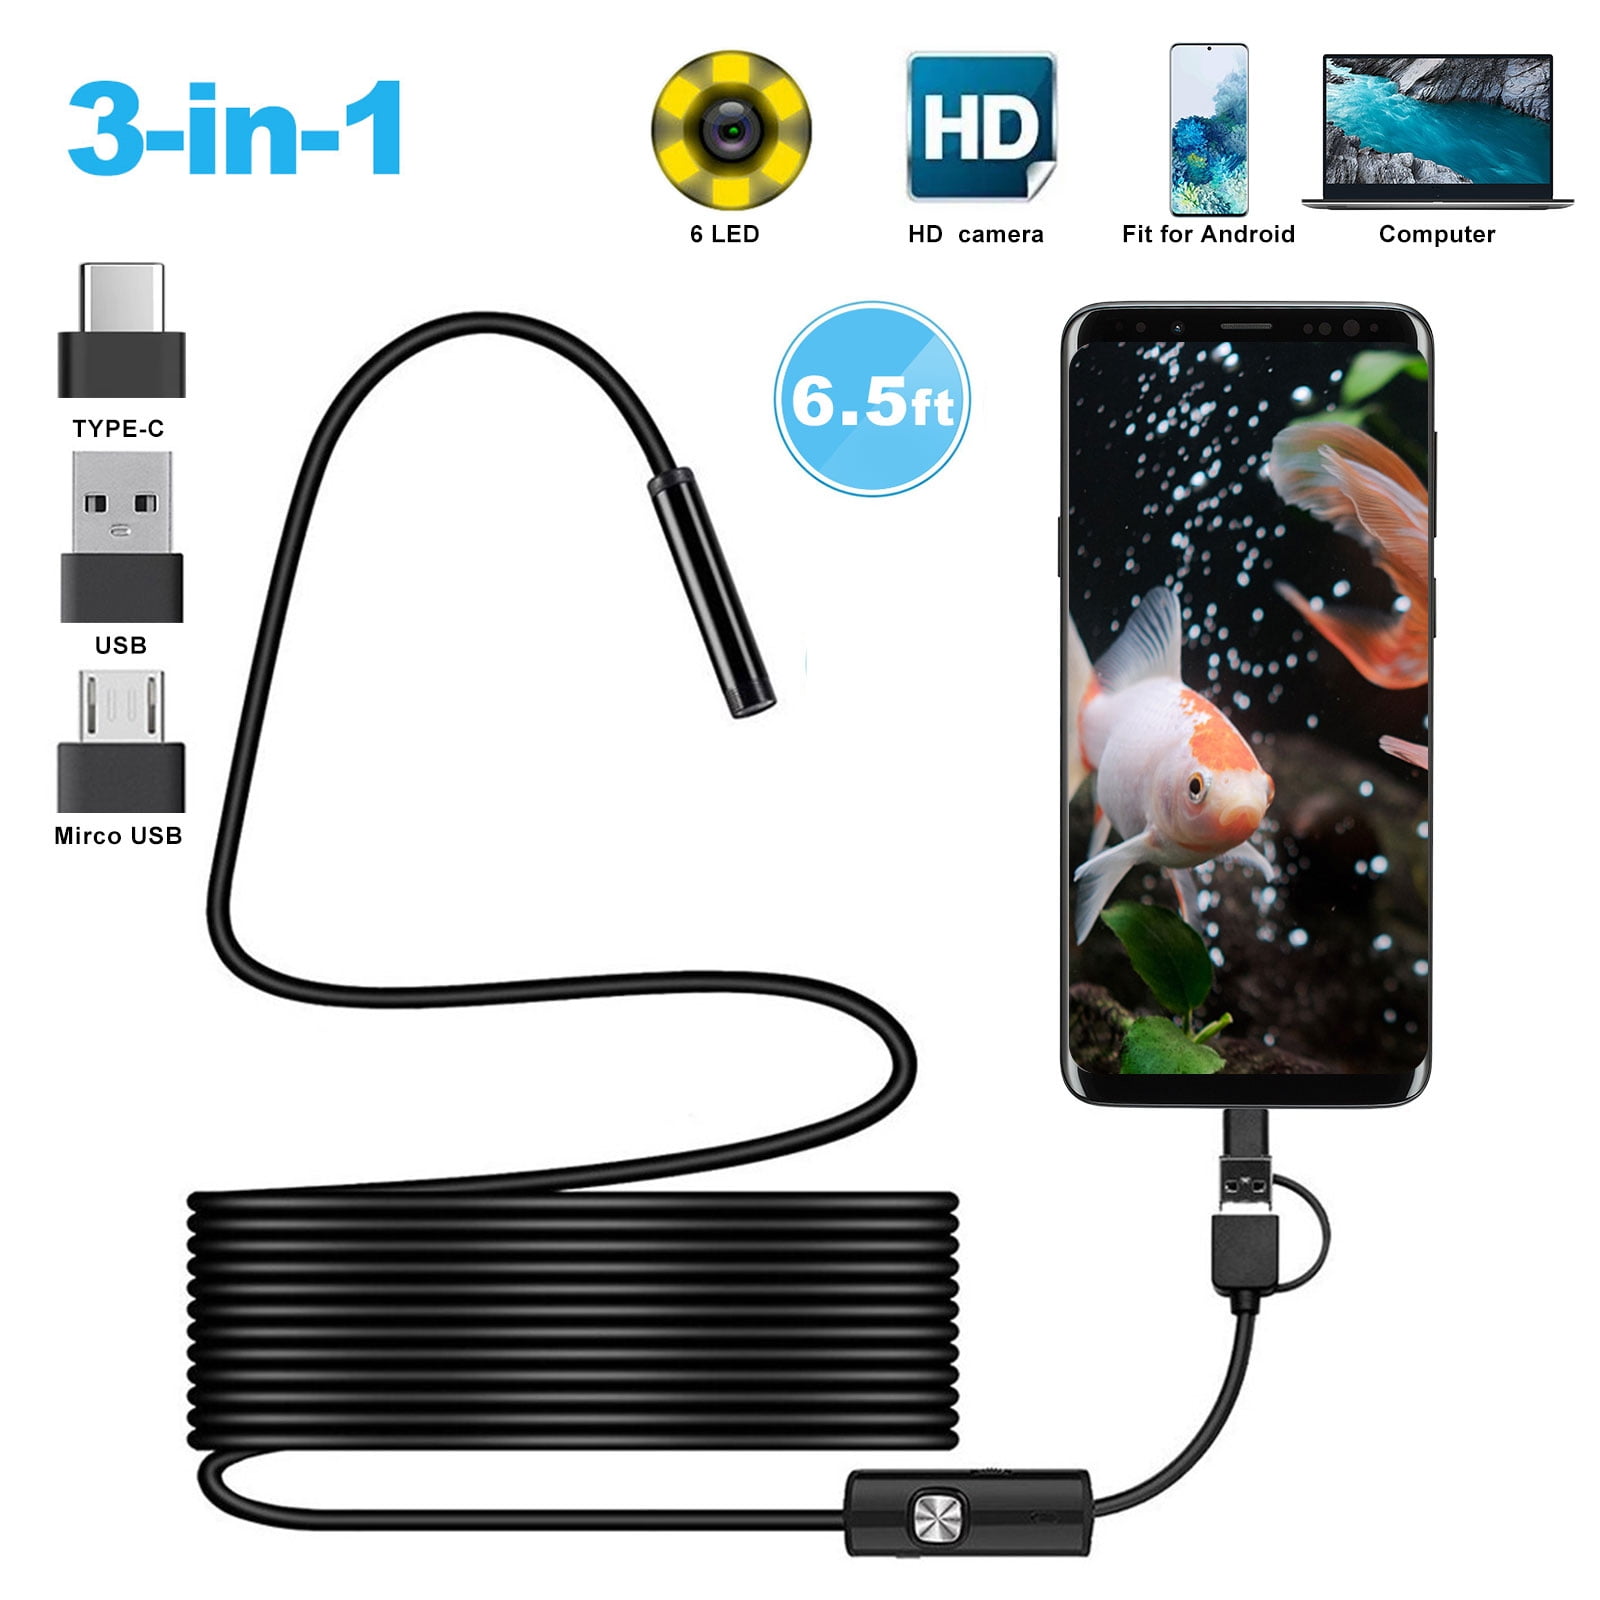 Waterproof IP67 with iOS/Android/iPad/Mac/PC/Laptop WFWPY 1M USB Endoscope Borescope Inspection Camera HD Semi-Rigid Snake Cable Borescope Waterproof Snake Camera with 6 LED Light for Laptop 